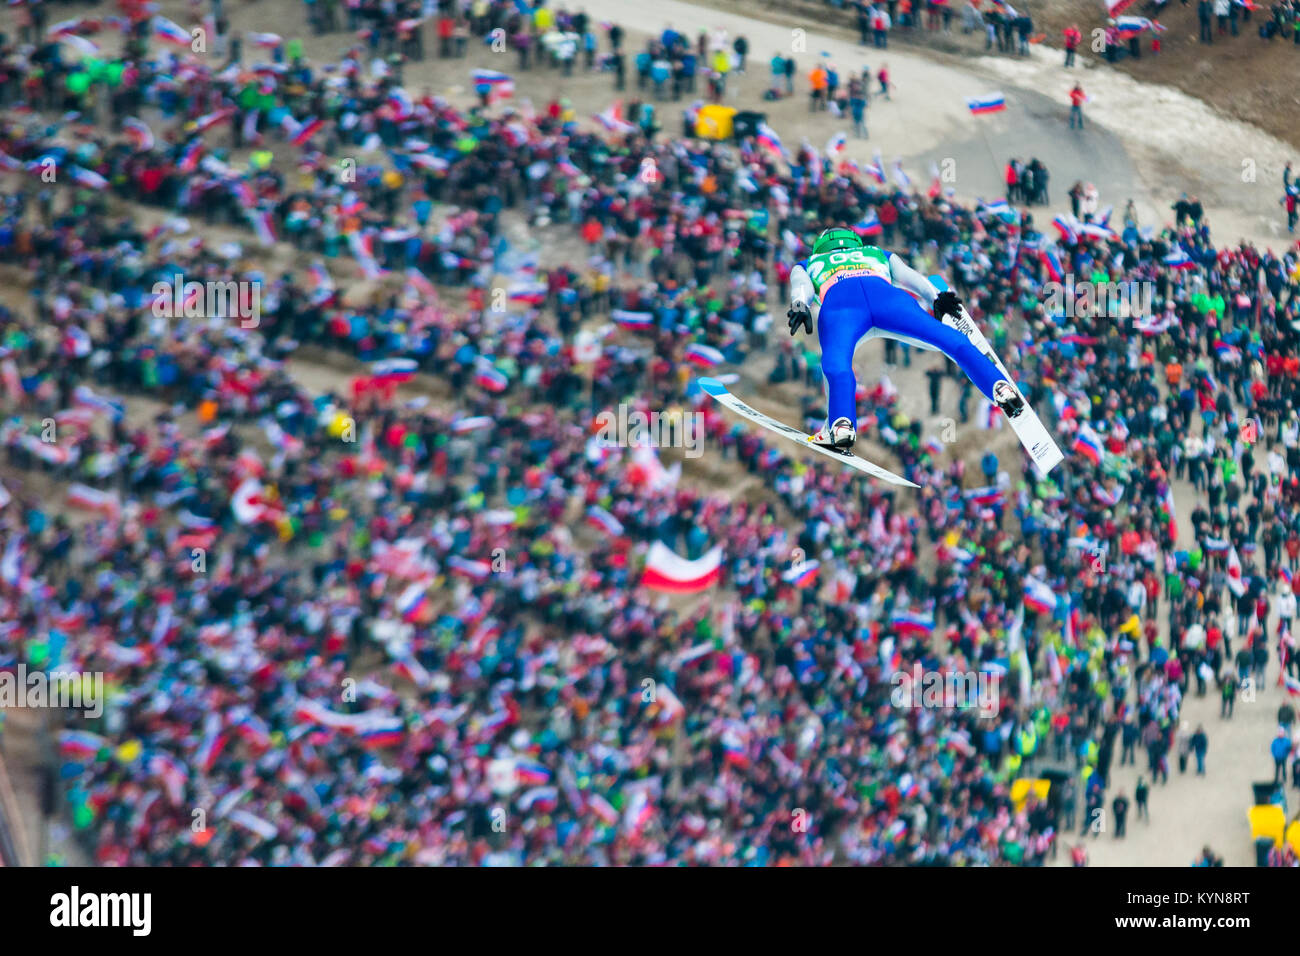 Flying skijumper Anže Lanišek above the crowd of supporters, Planica 2017, Slovenia, FIS Ski Jumping World Cup finals Stock Photo